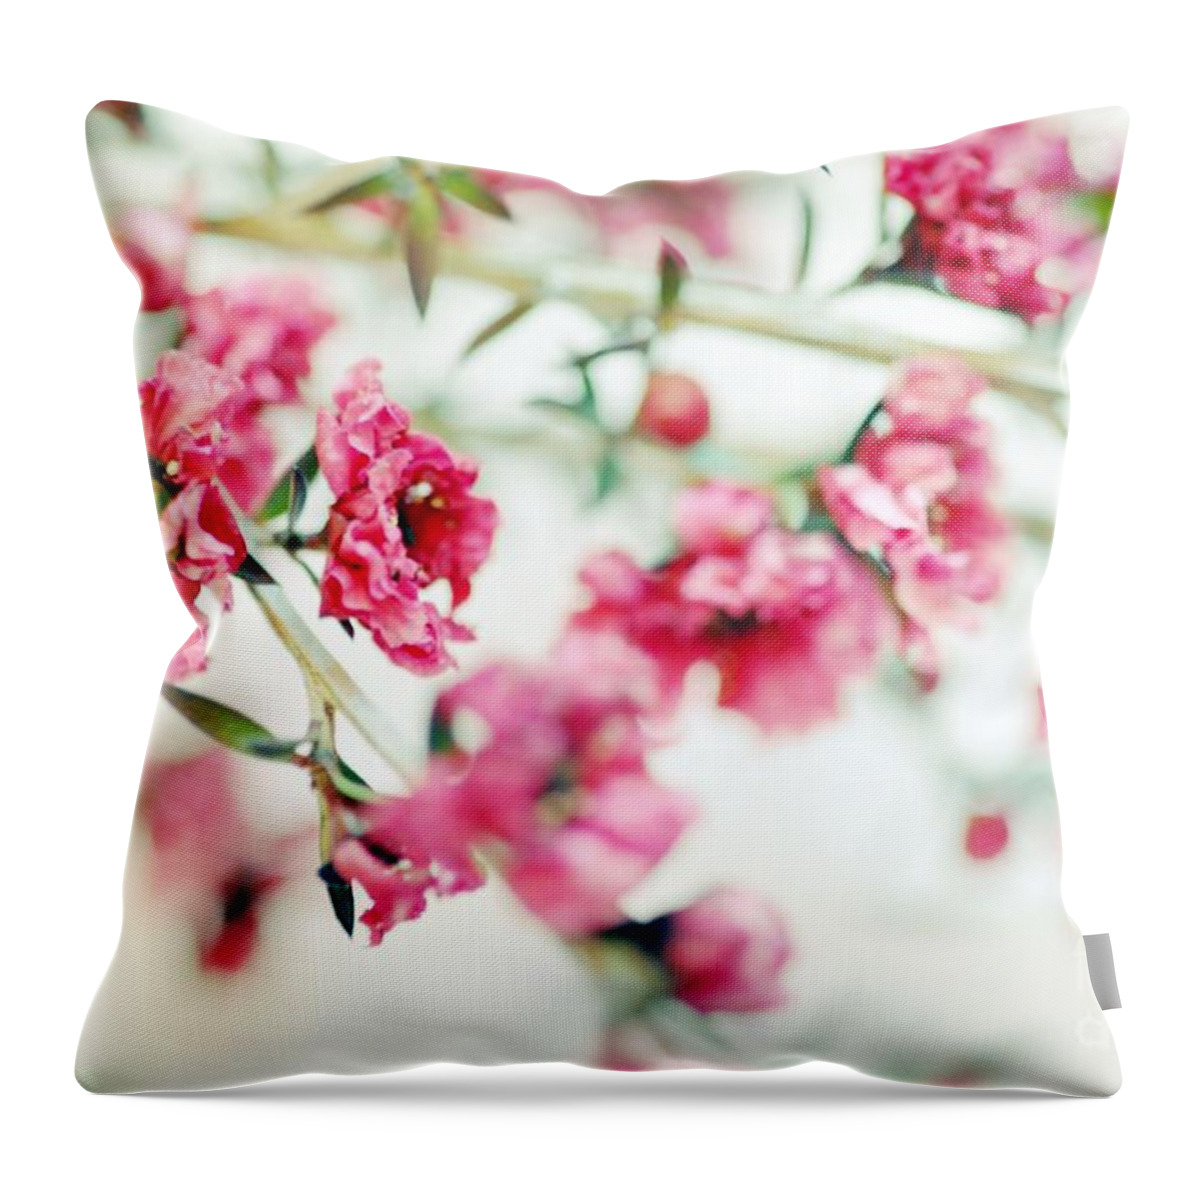 Pink Throw Pillow featuring the photograph Little Dreams on Stems by Lisa Argyropoulos